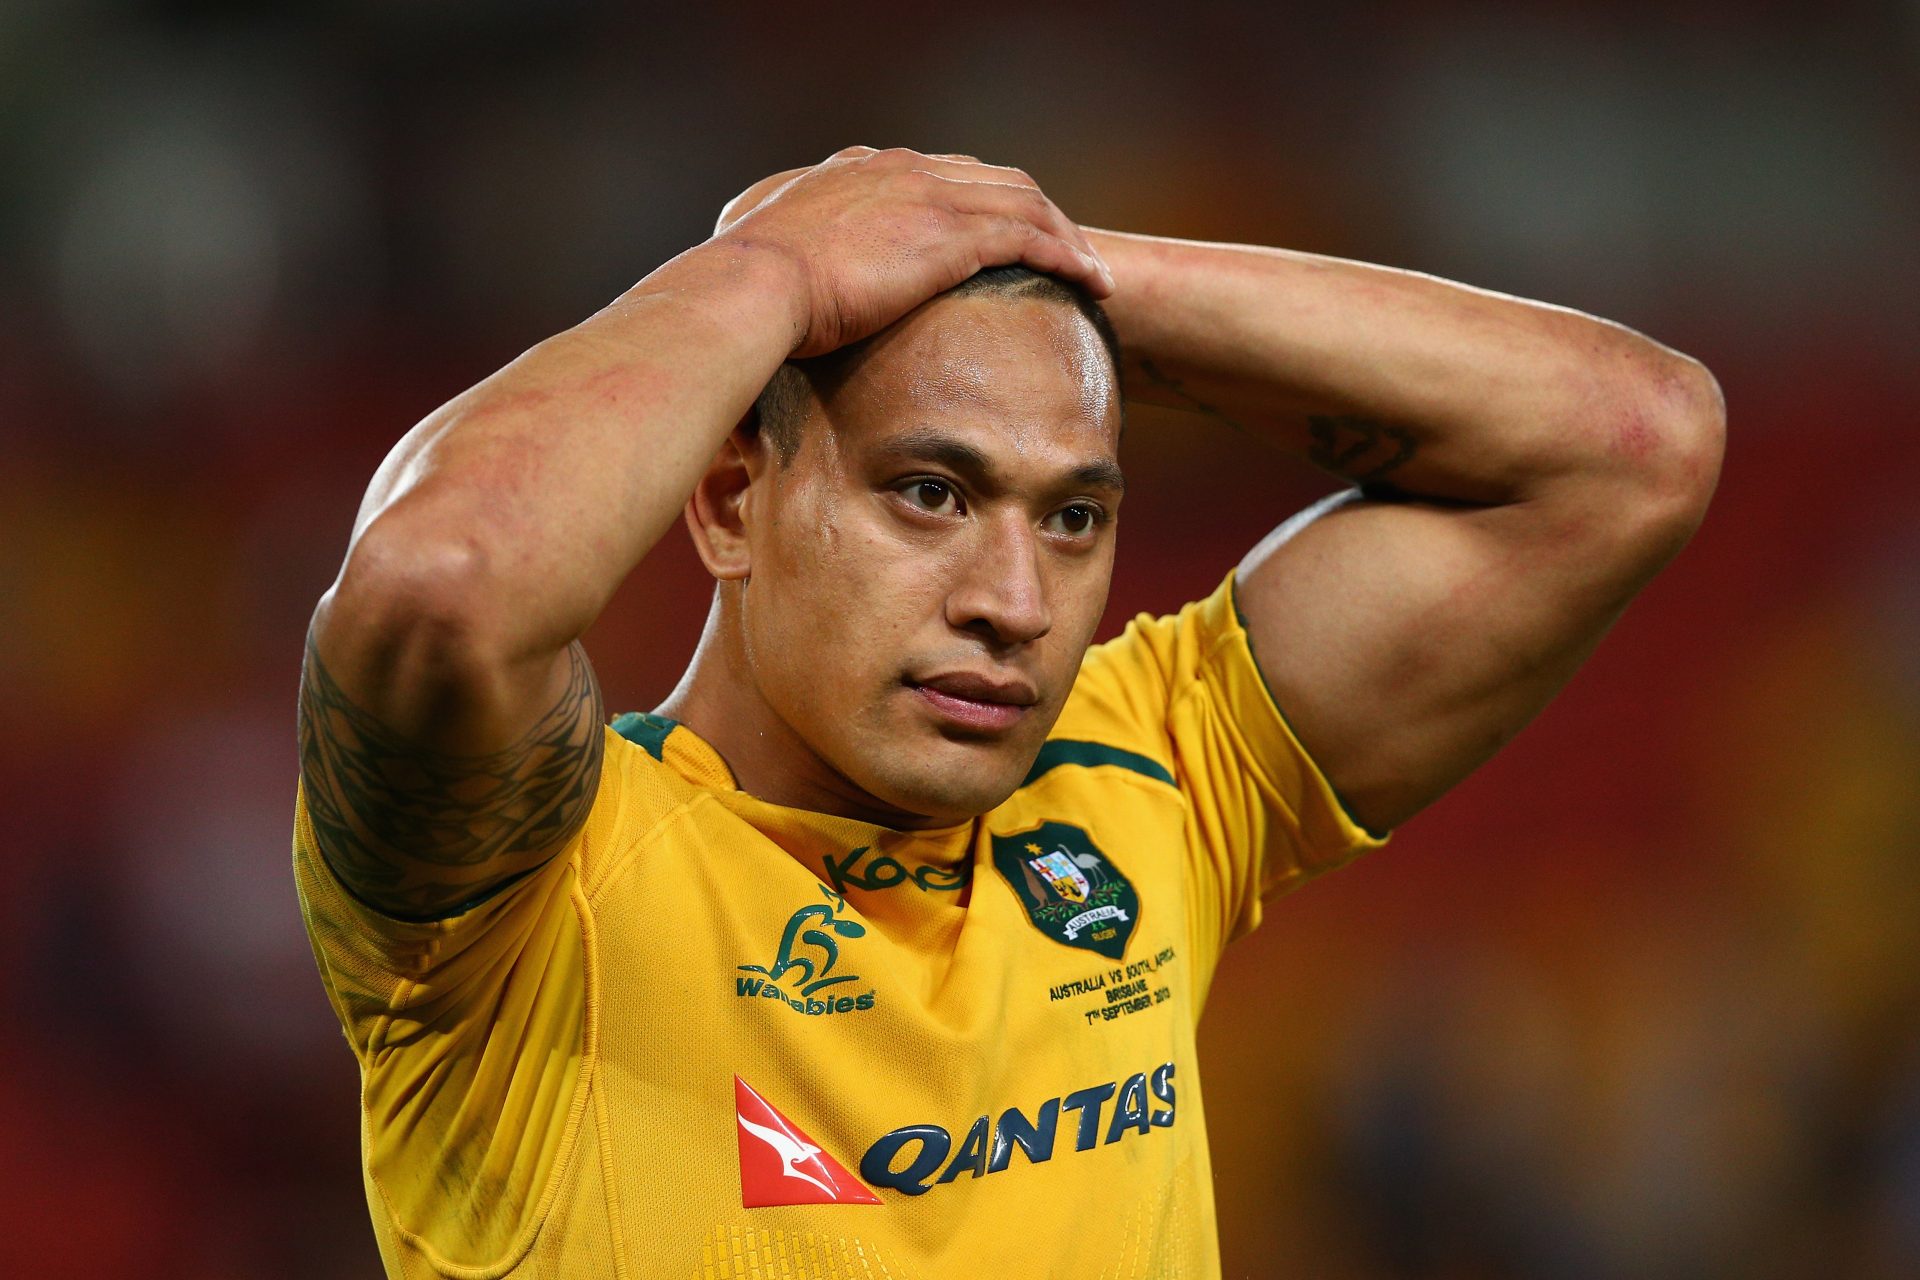 Israel Folau: Where did it all go wrong for the rugby superstar?